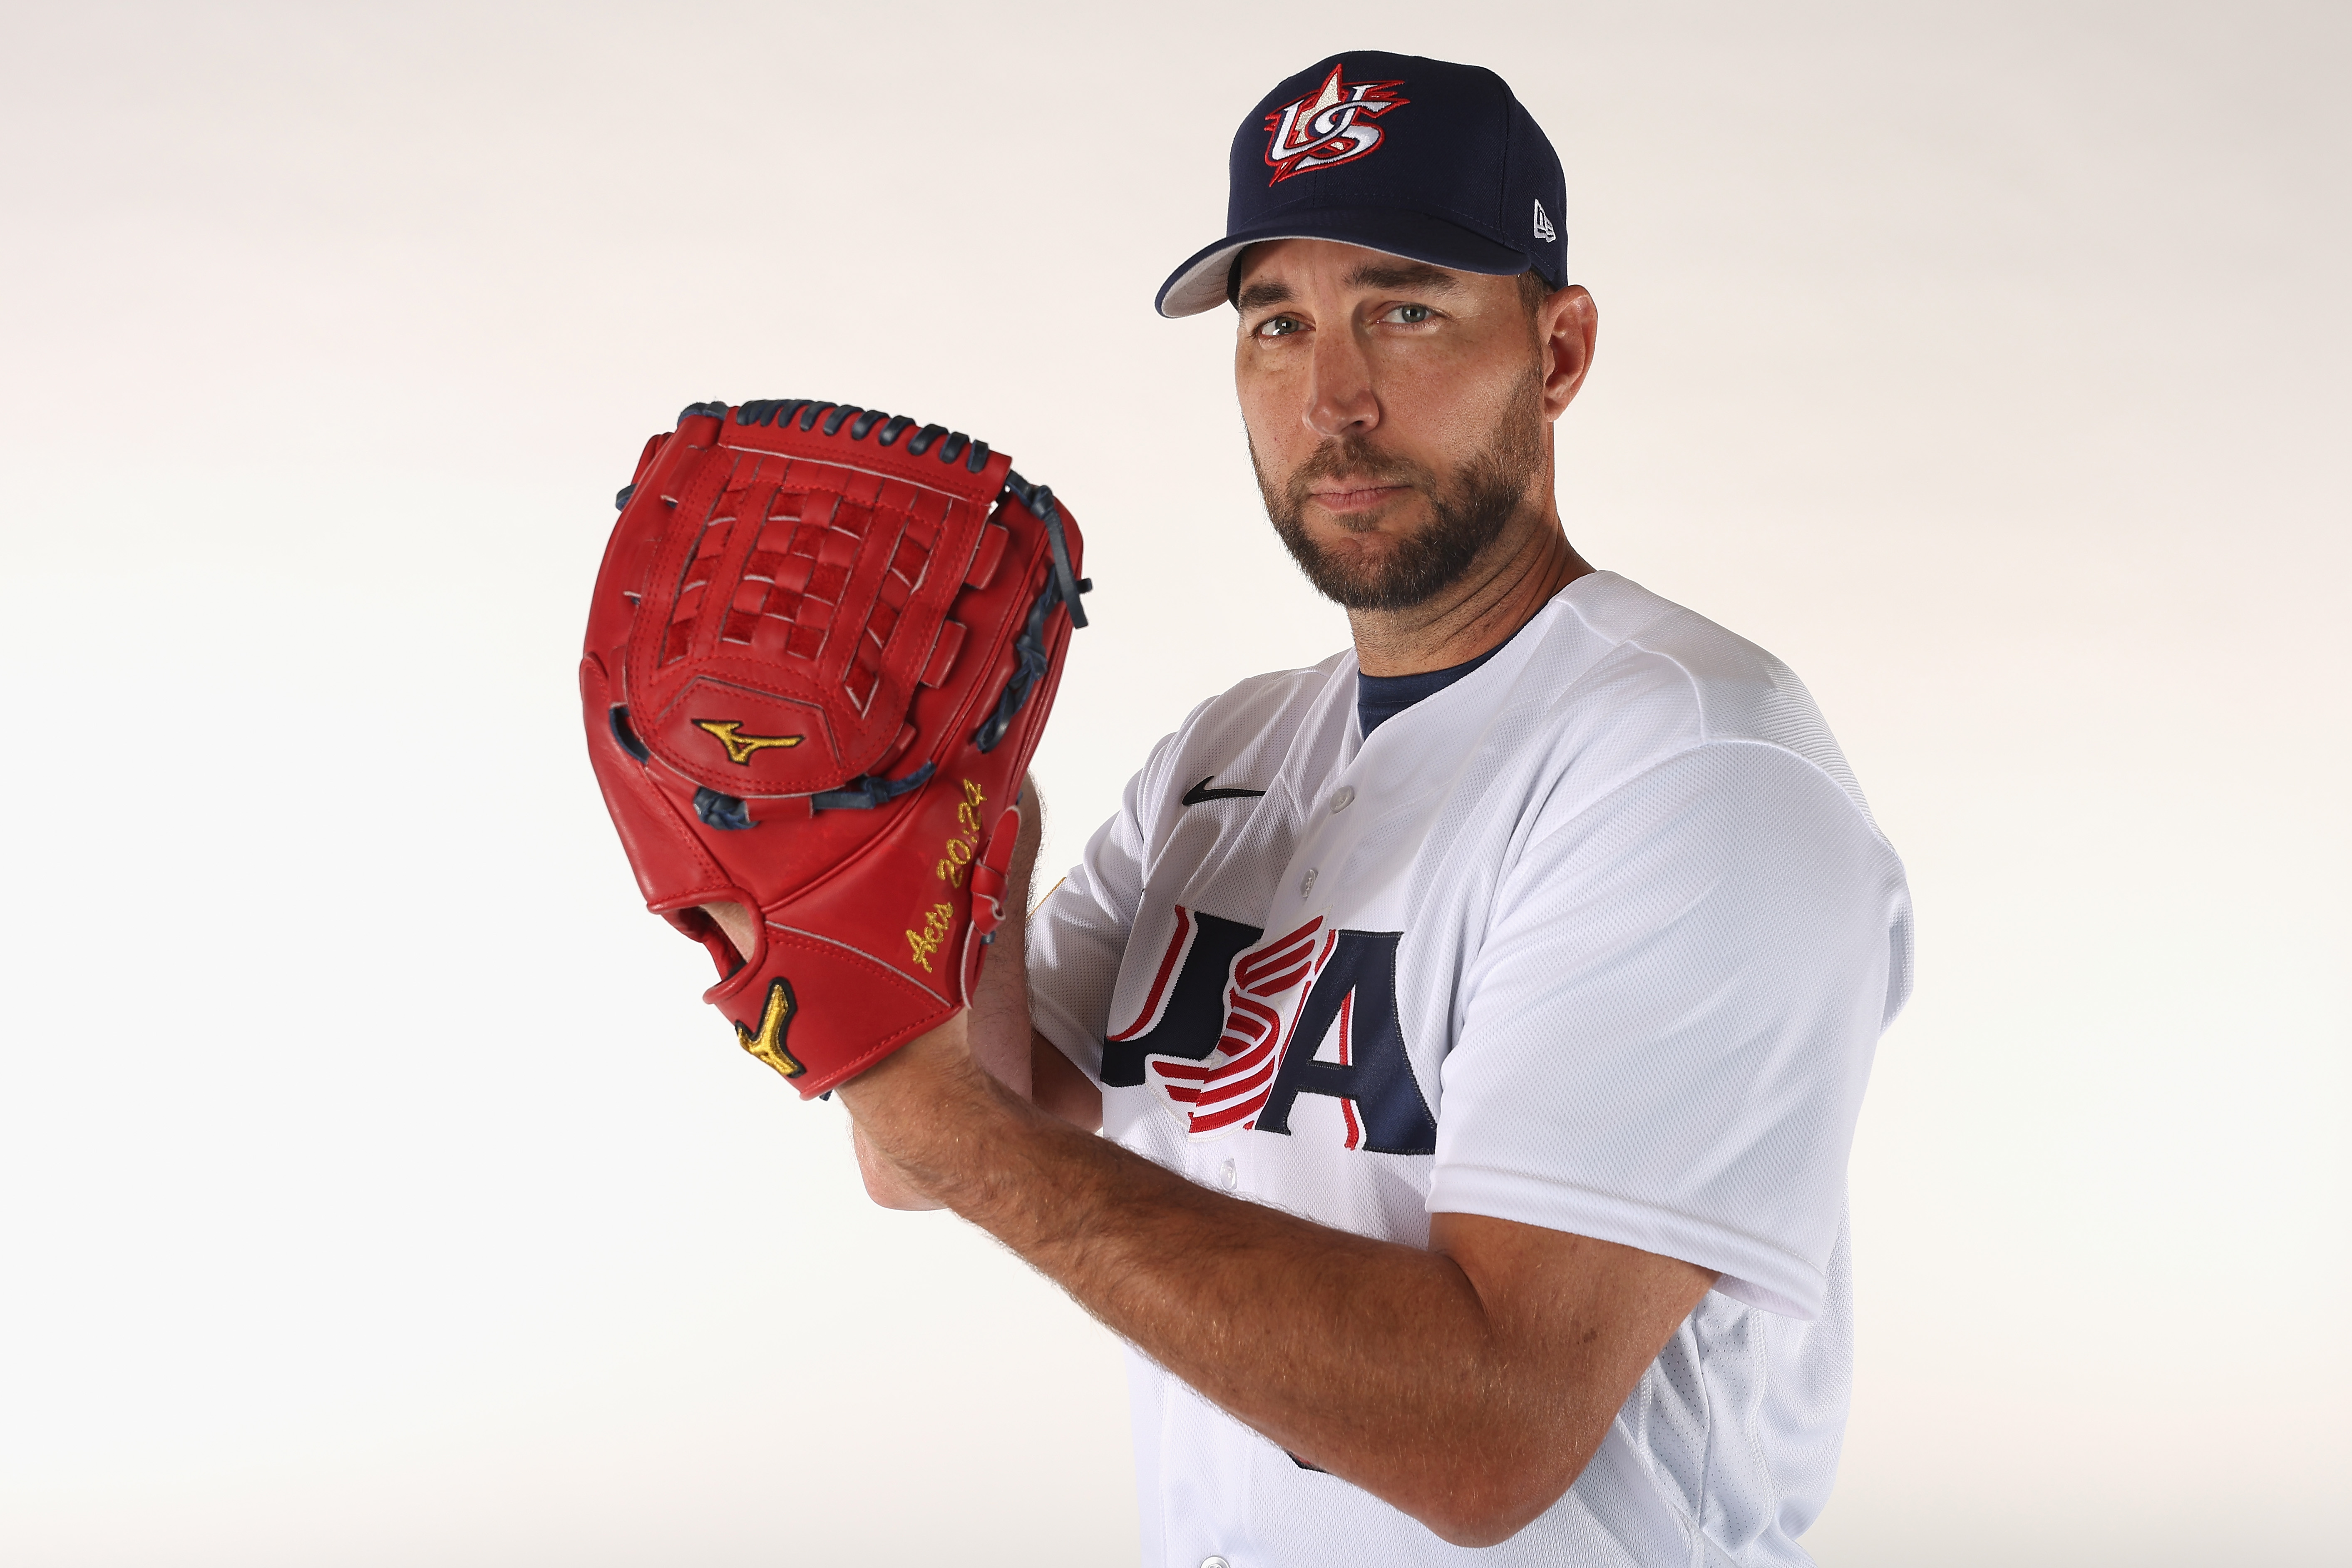 Pitcher Adam Wainwright #50 of Team USA poses for a portrait ahead of the World Baseball Classic at Papago Park Sports Complex on March 07, 2023 in Phoenix, Arizona.